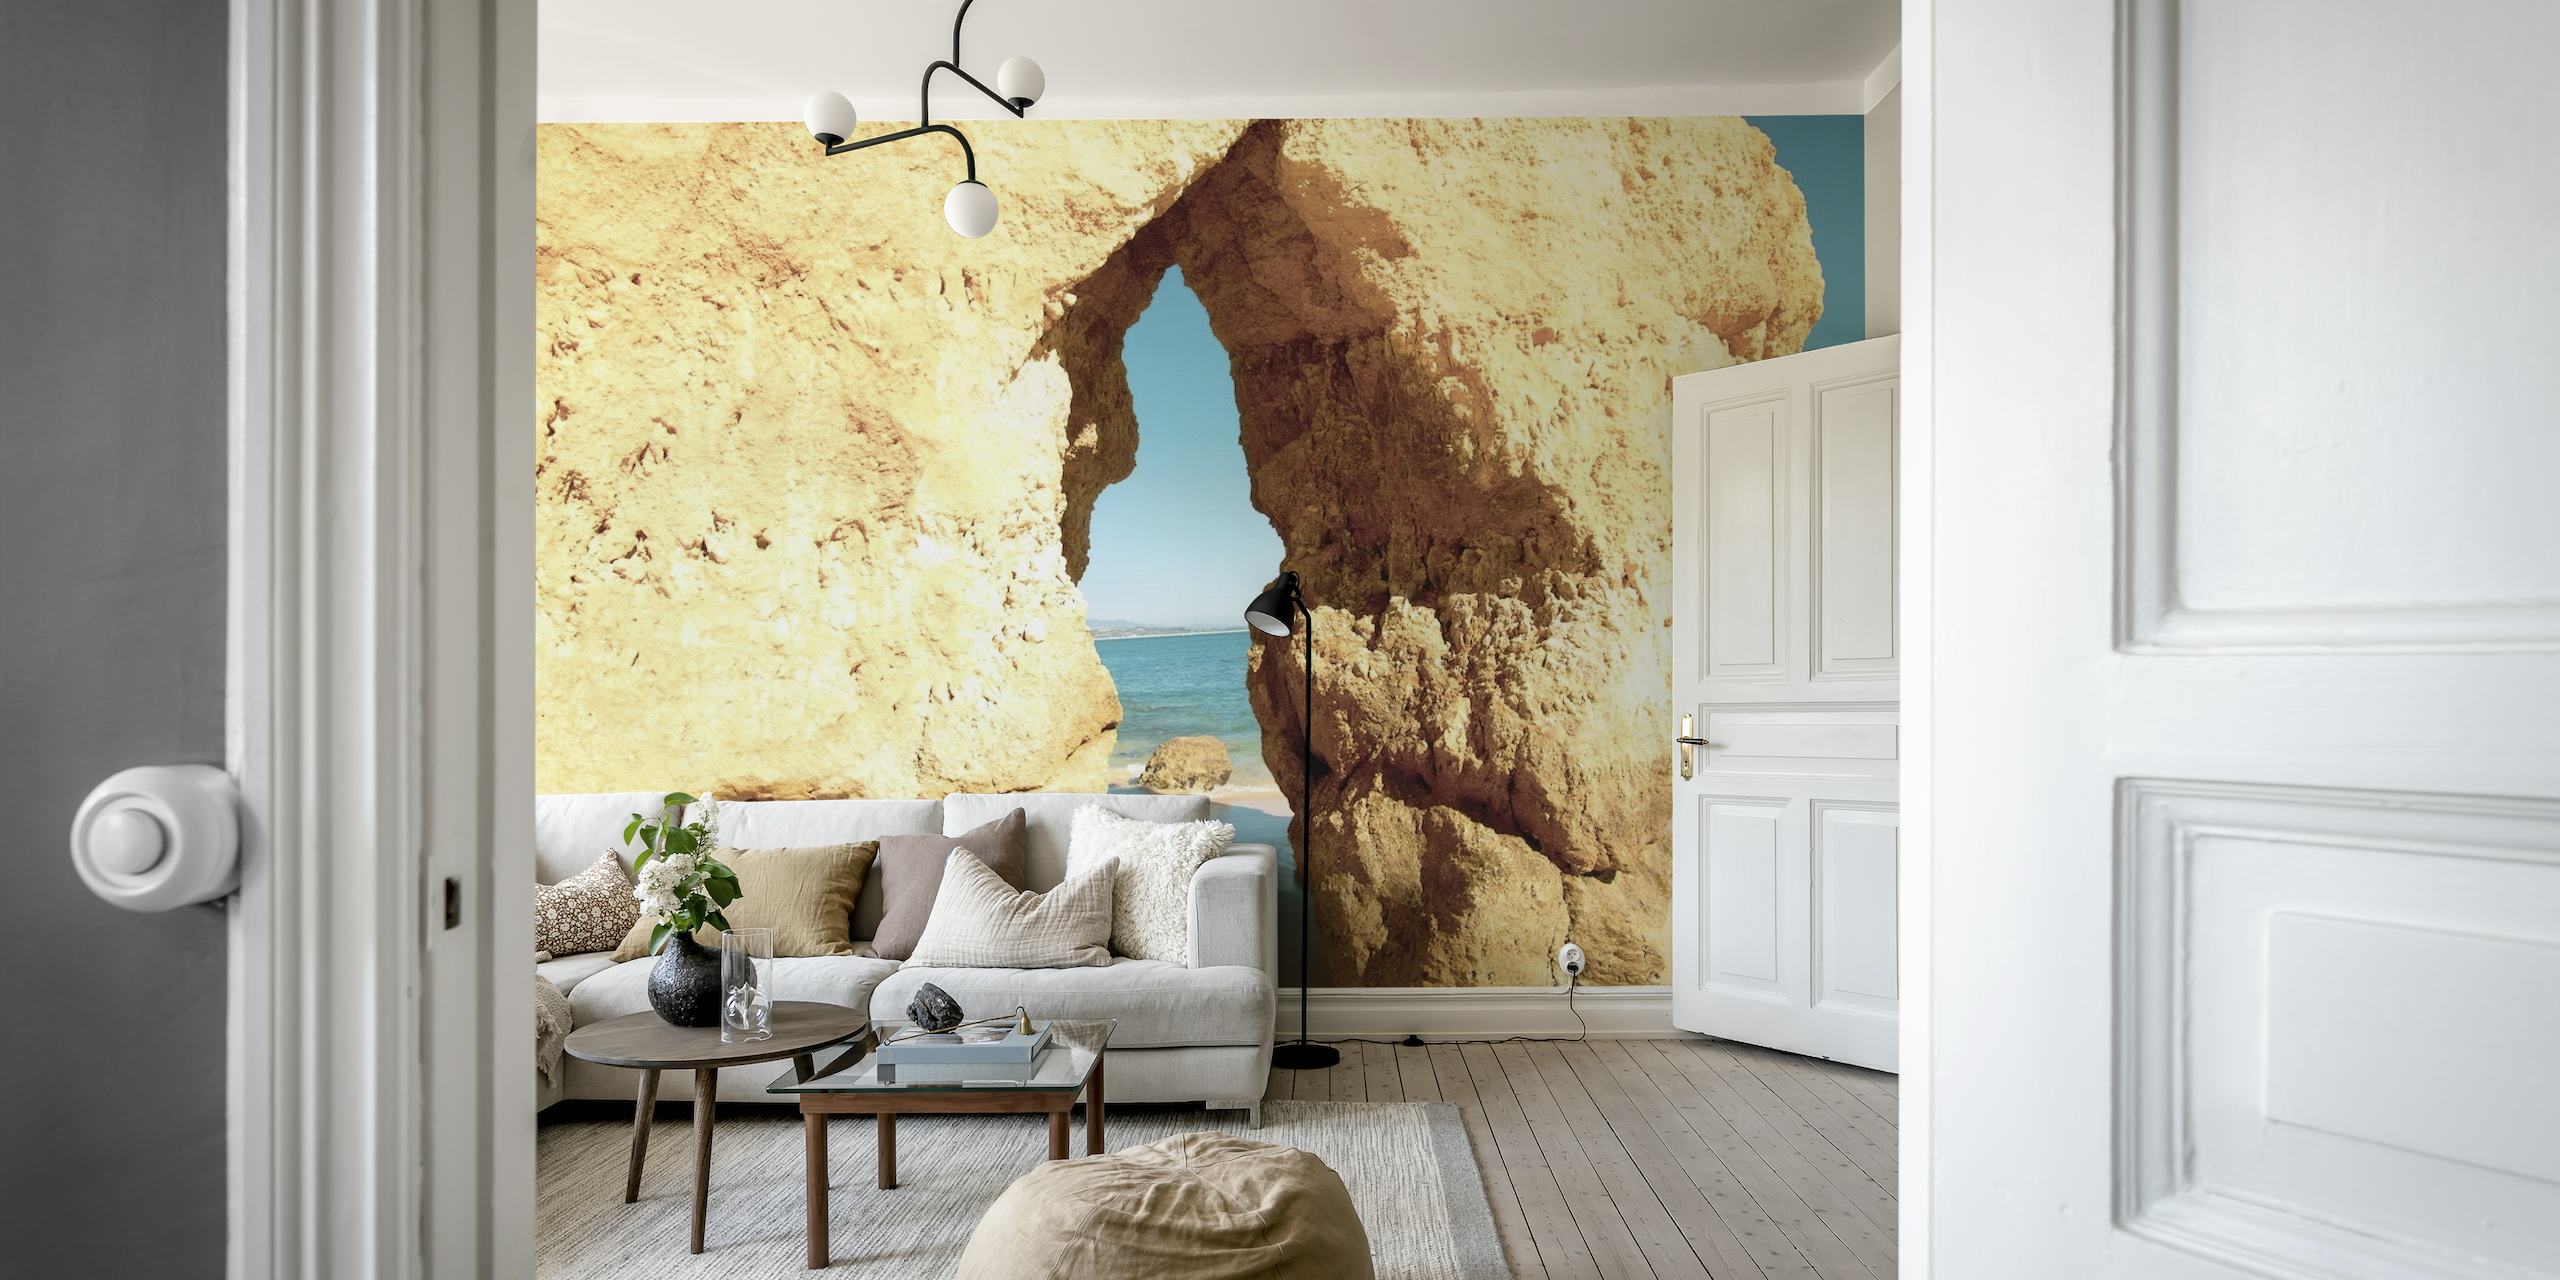 Natural rock archway at Camilo Beach wall mural with blue sky and golden sands